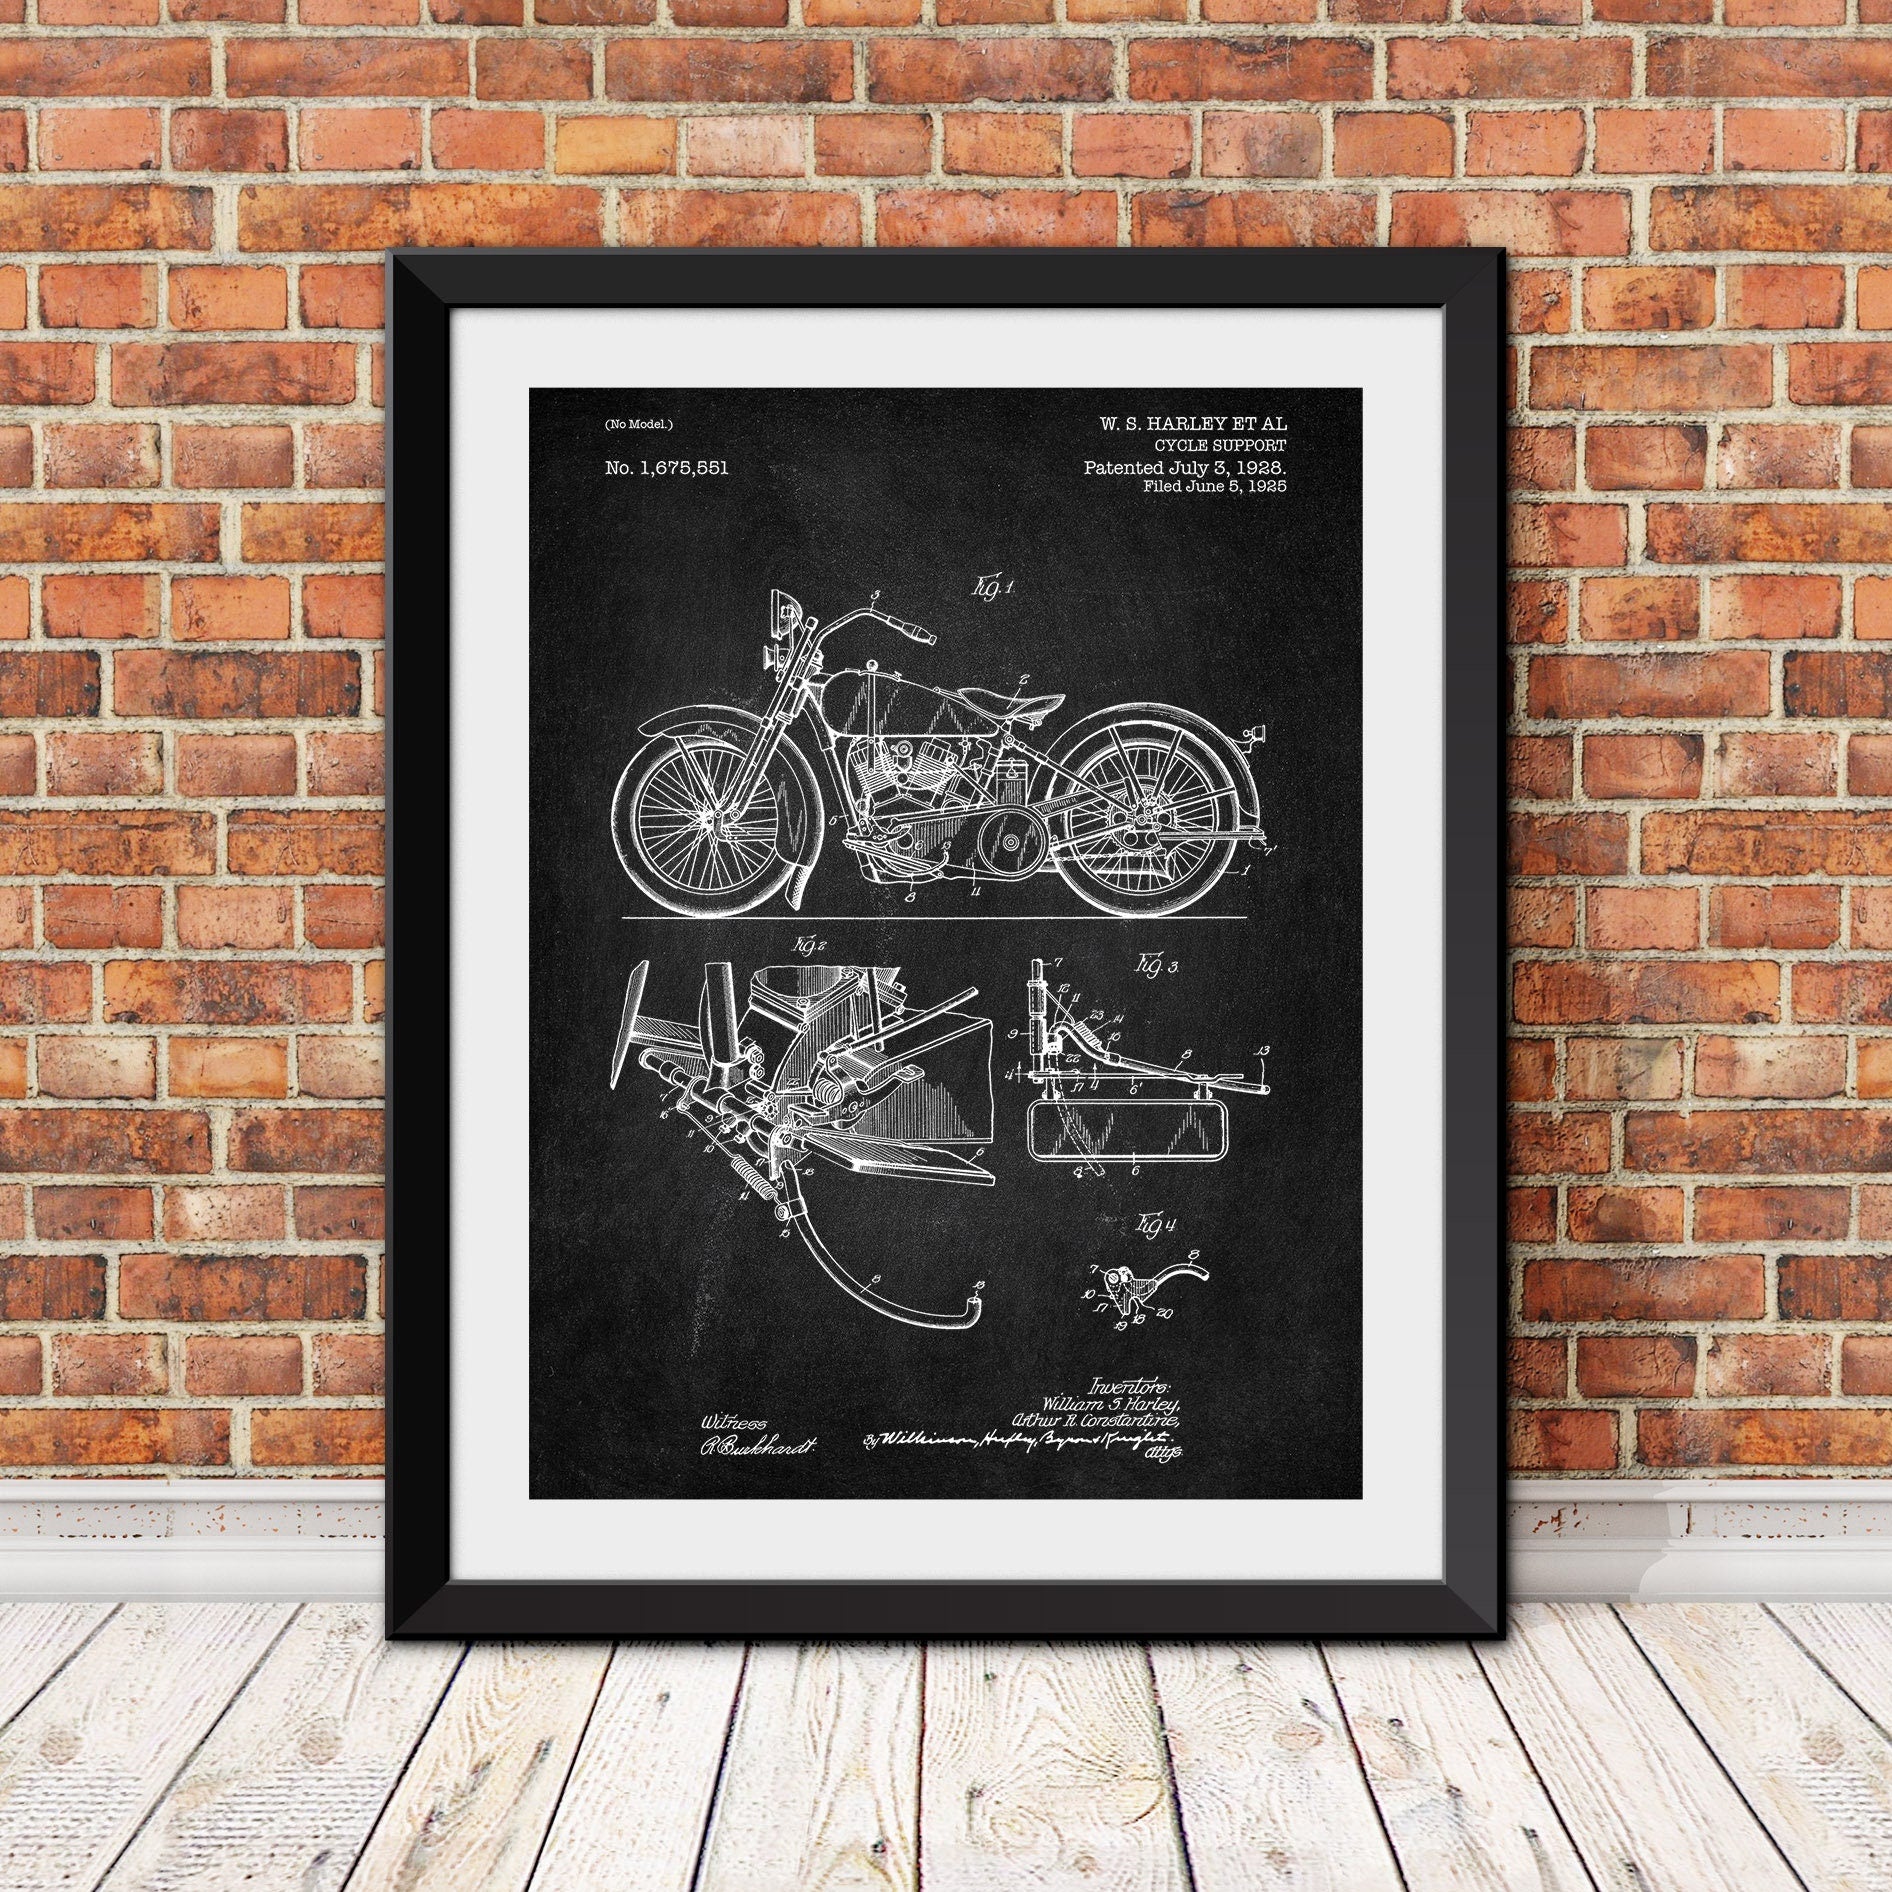 Harley Cycle Support Patent, Harley Davidson, Harley Print, Motorcycle Art, Harley Davidson Art, Vintage Harley Print, Motorcycle Print